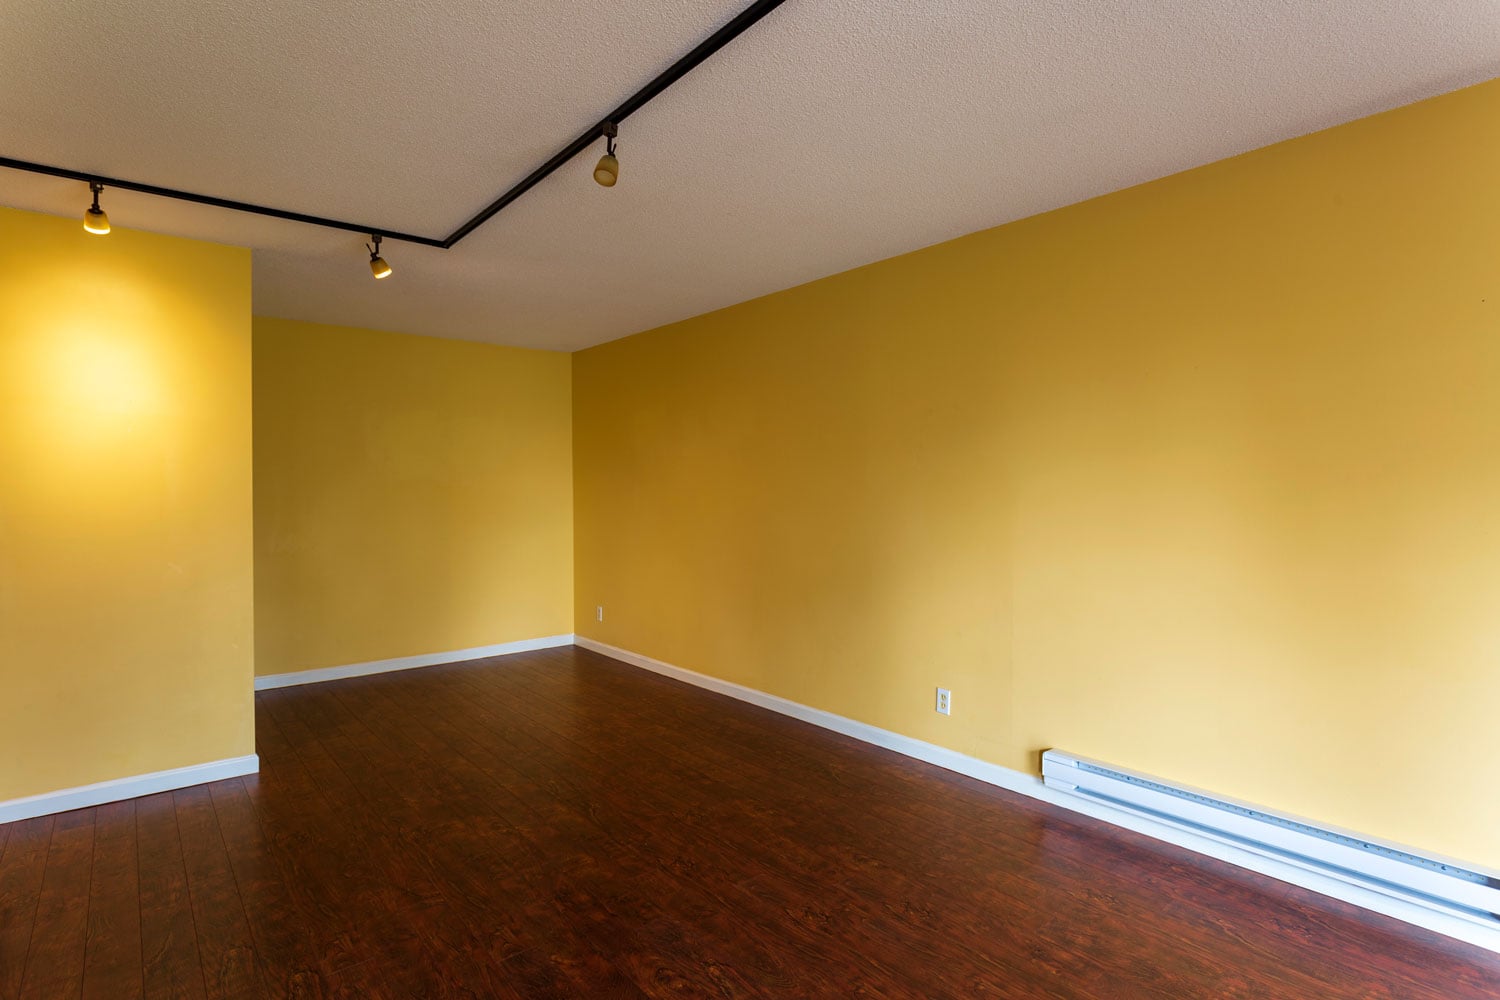 White empty living room interior with yellow walls and hardwood flooring